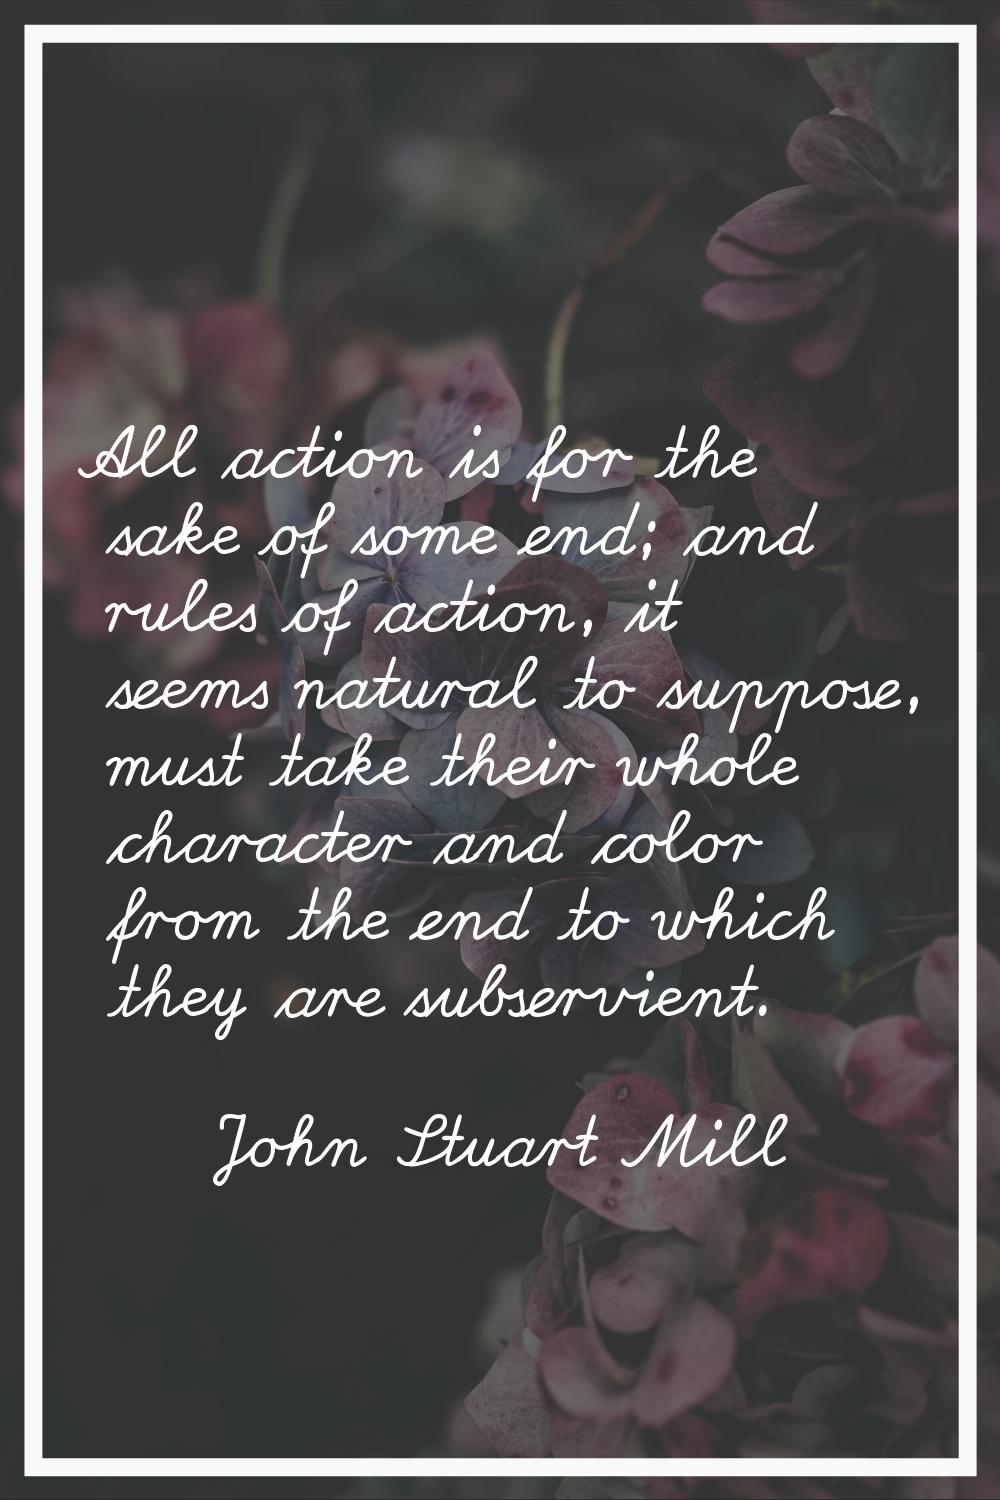 All action is for the sake of some end; and rules of action, it seems natural to suppose, must take